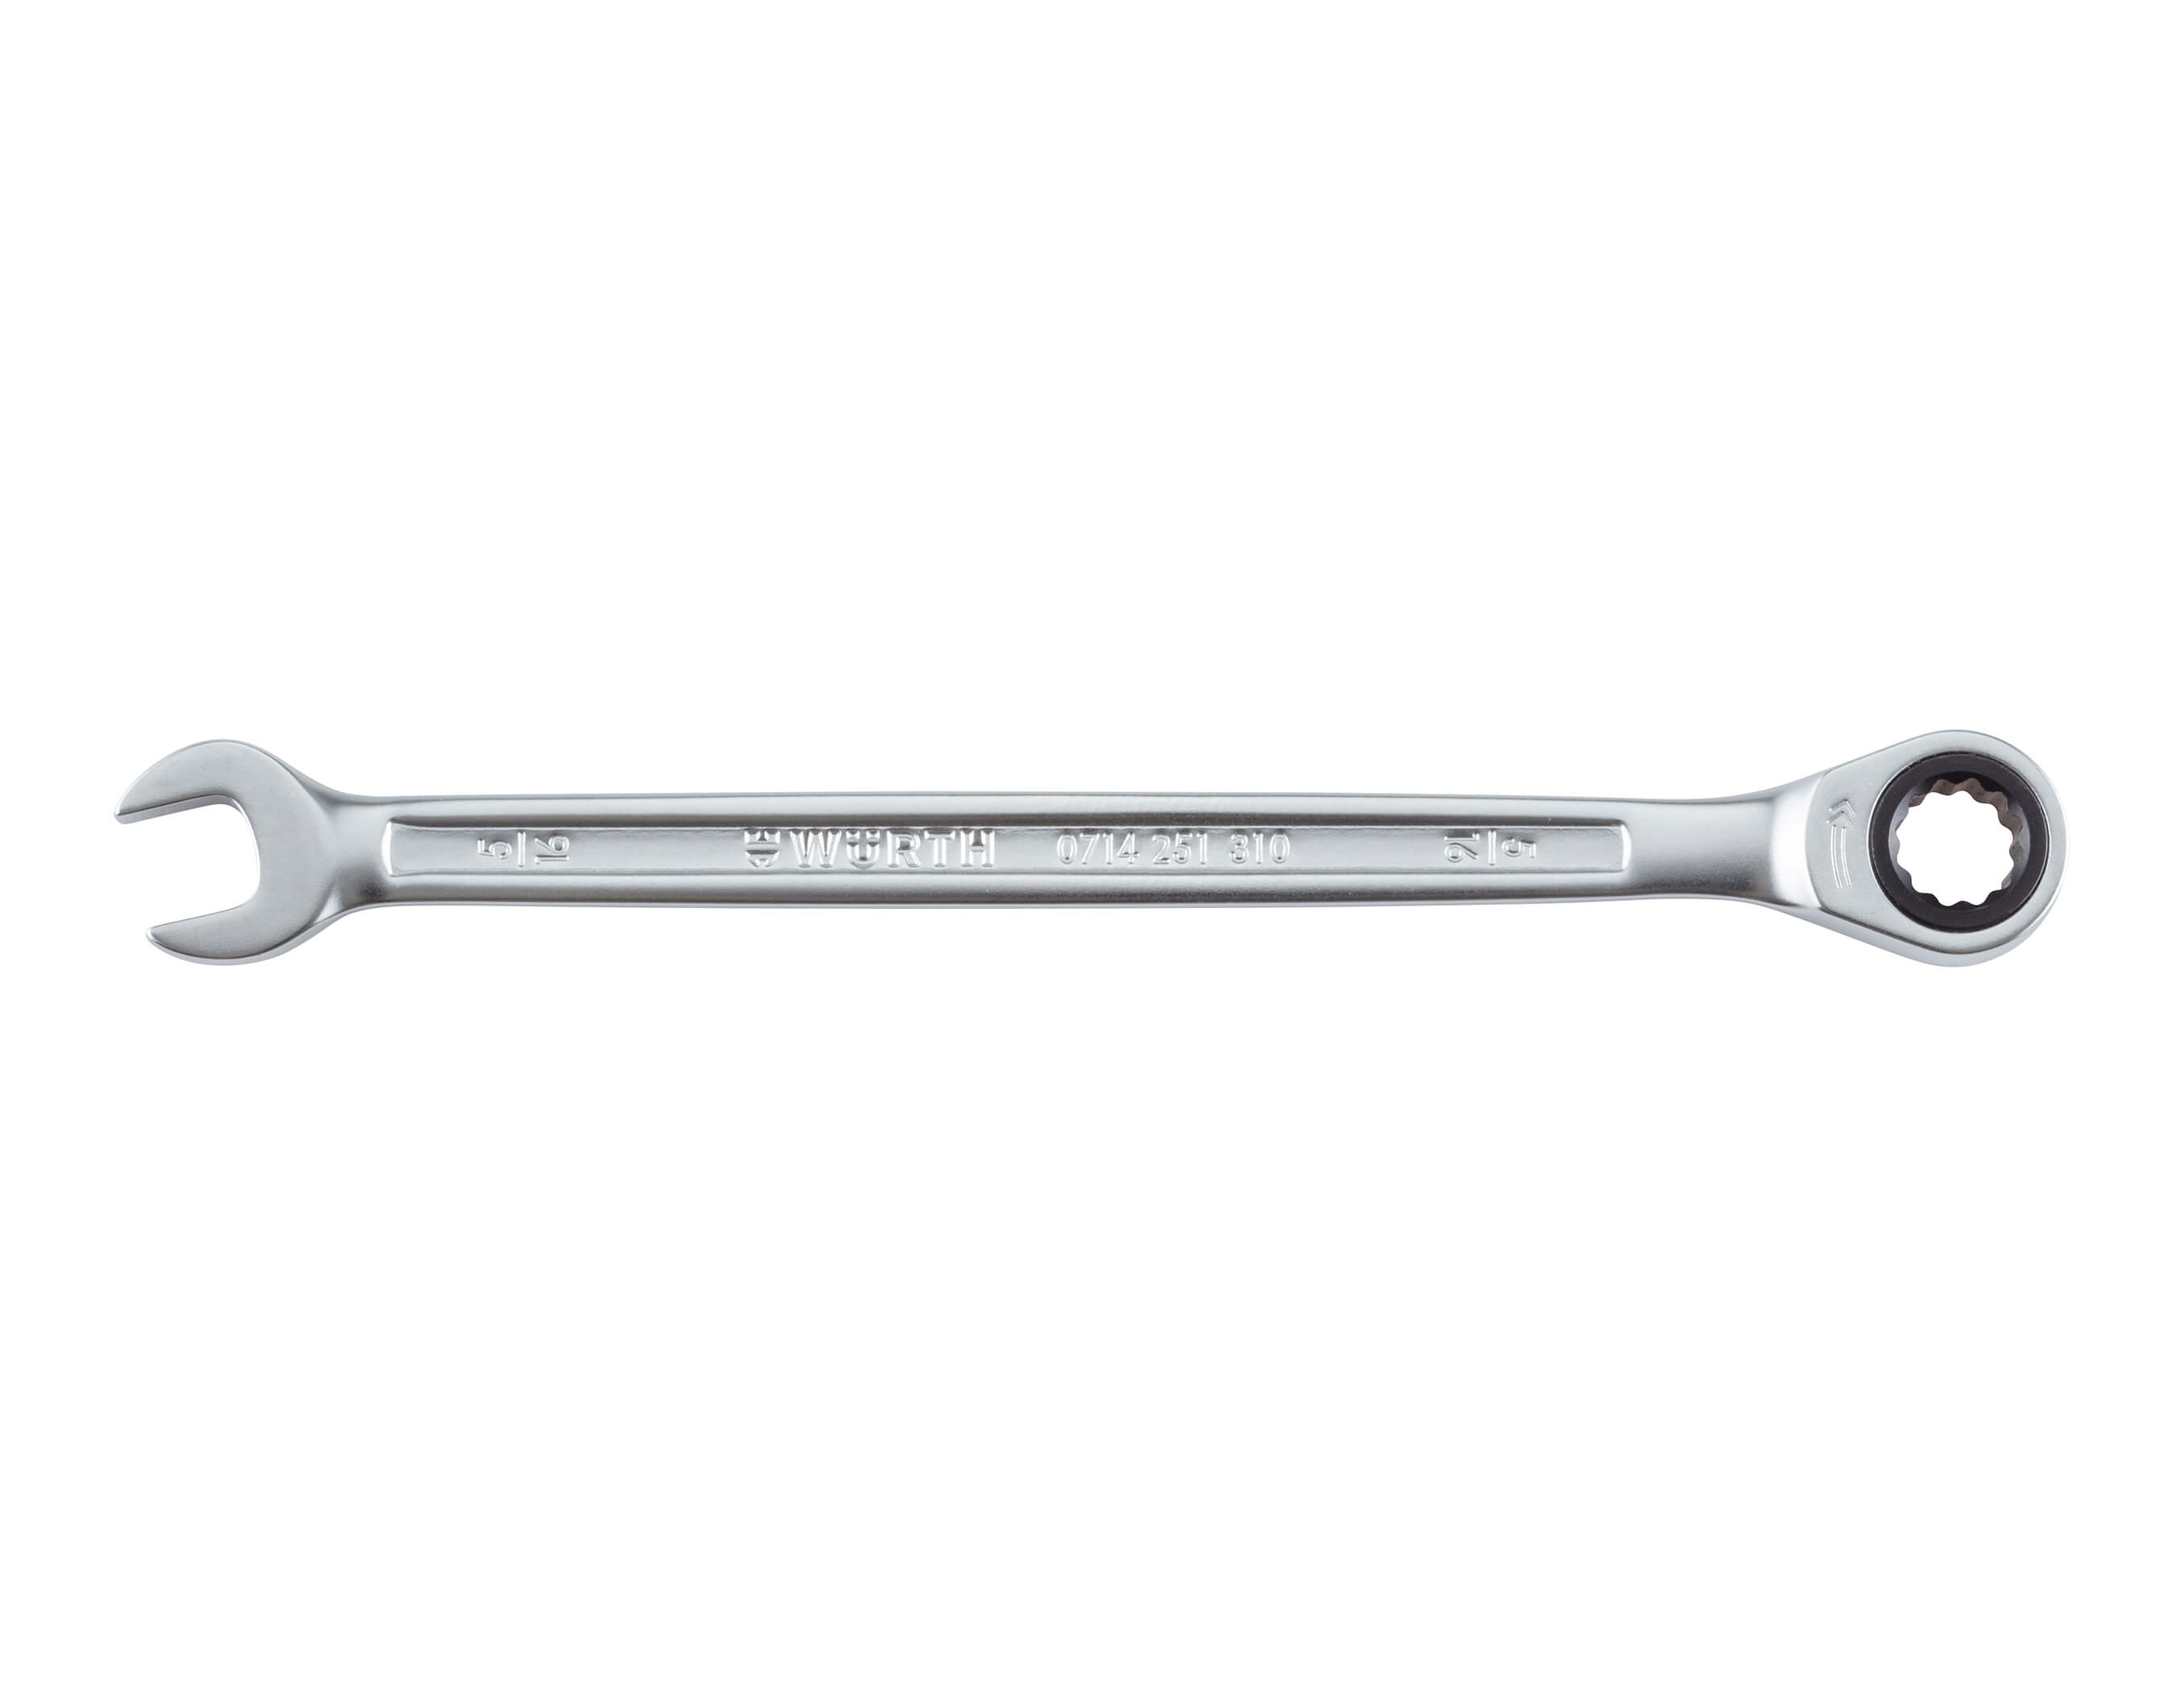 Ratcheting Combination Wrench 11/16 "